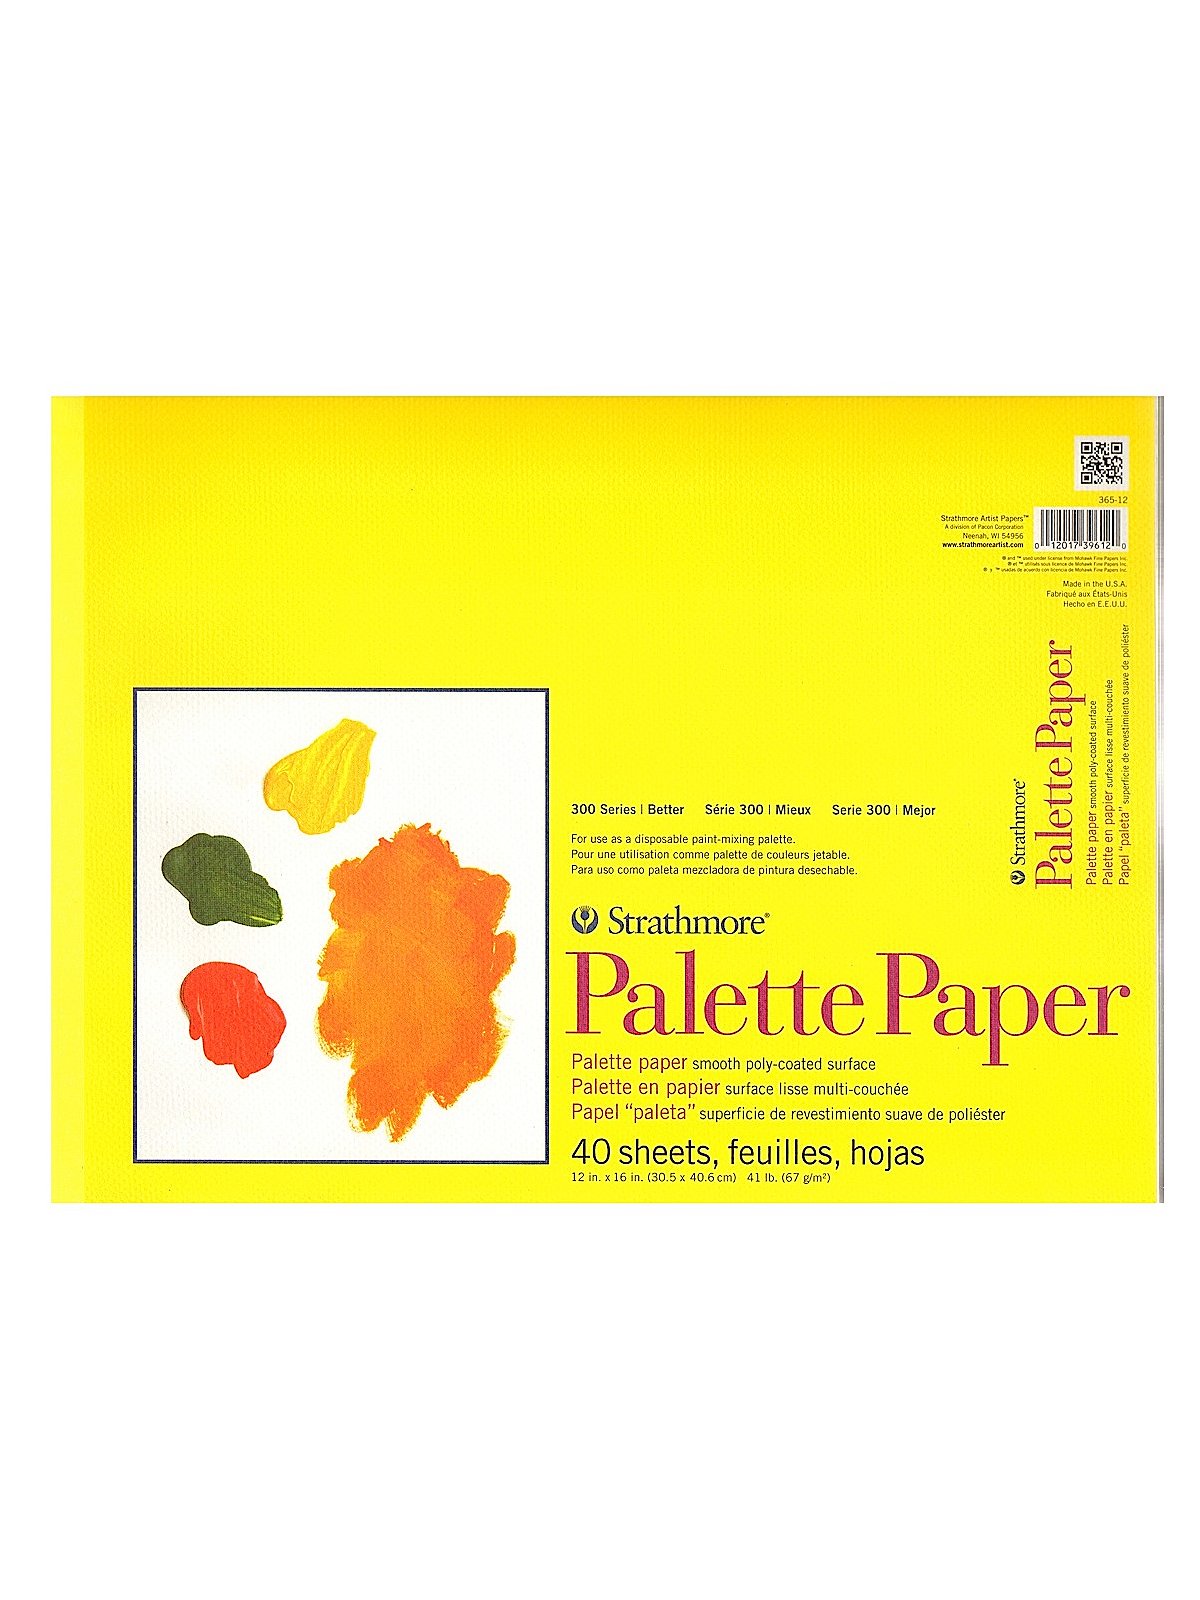 Painting Papers - Strathmore Artist Papers